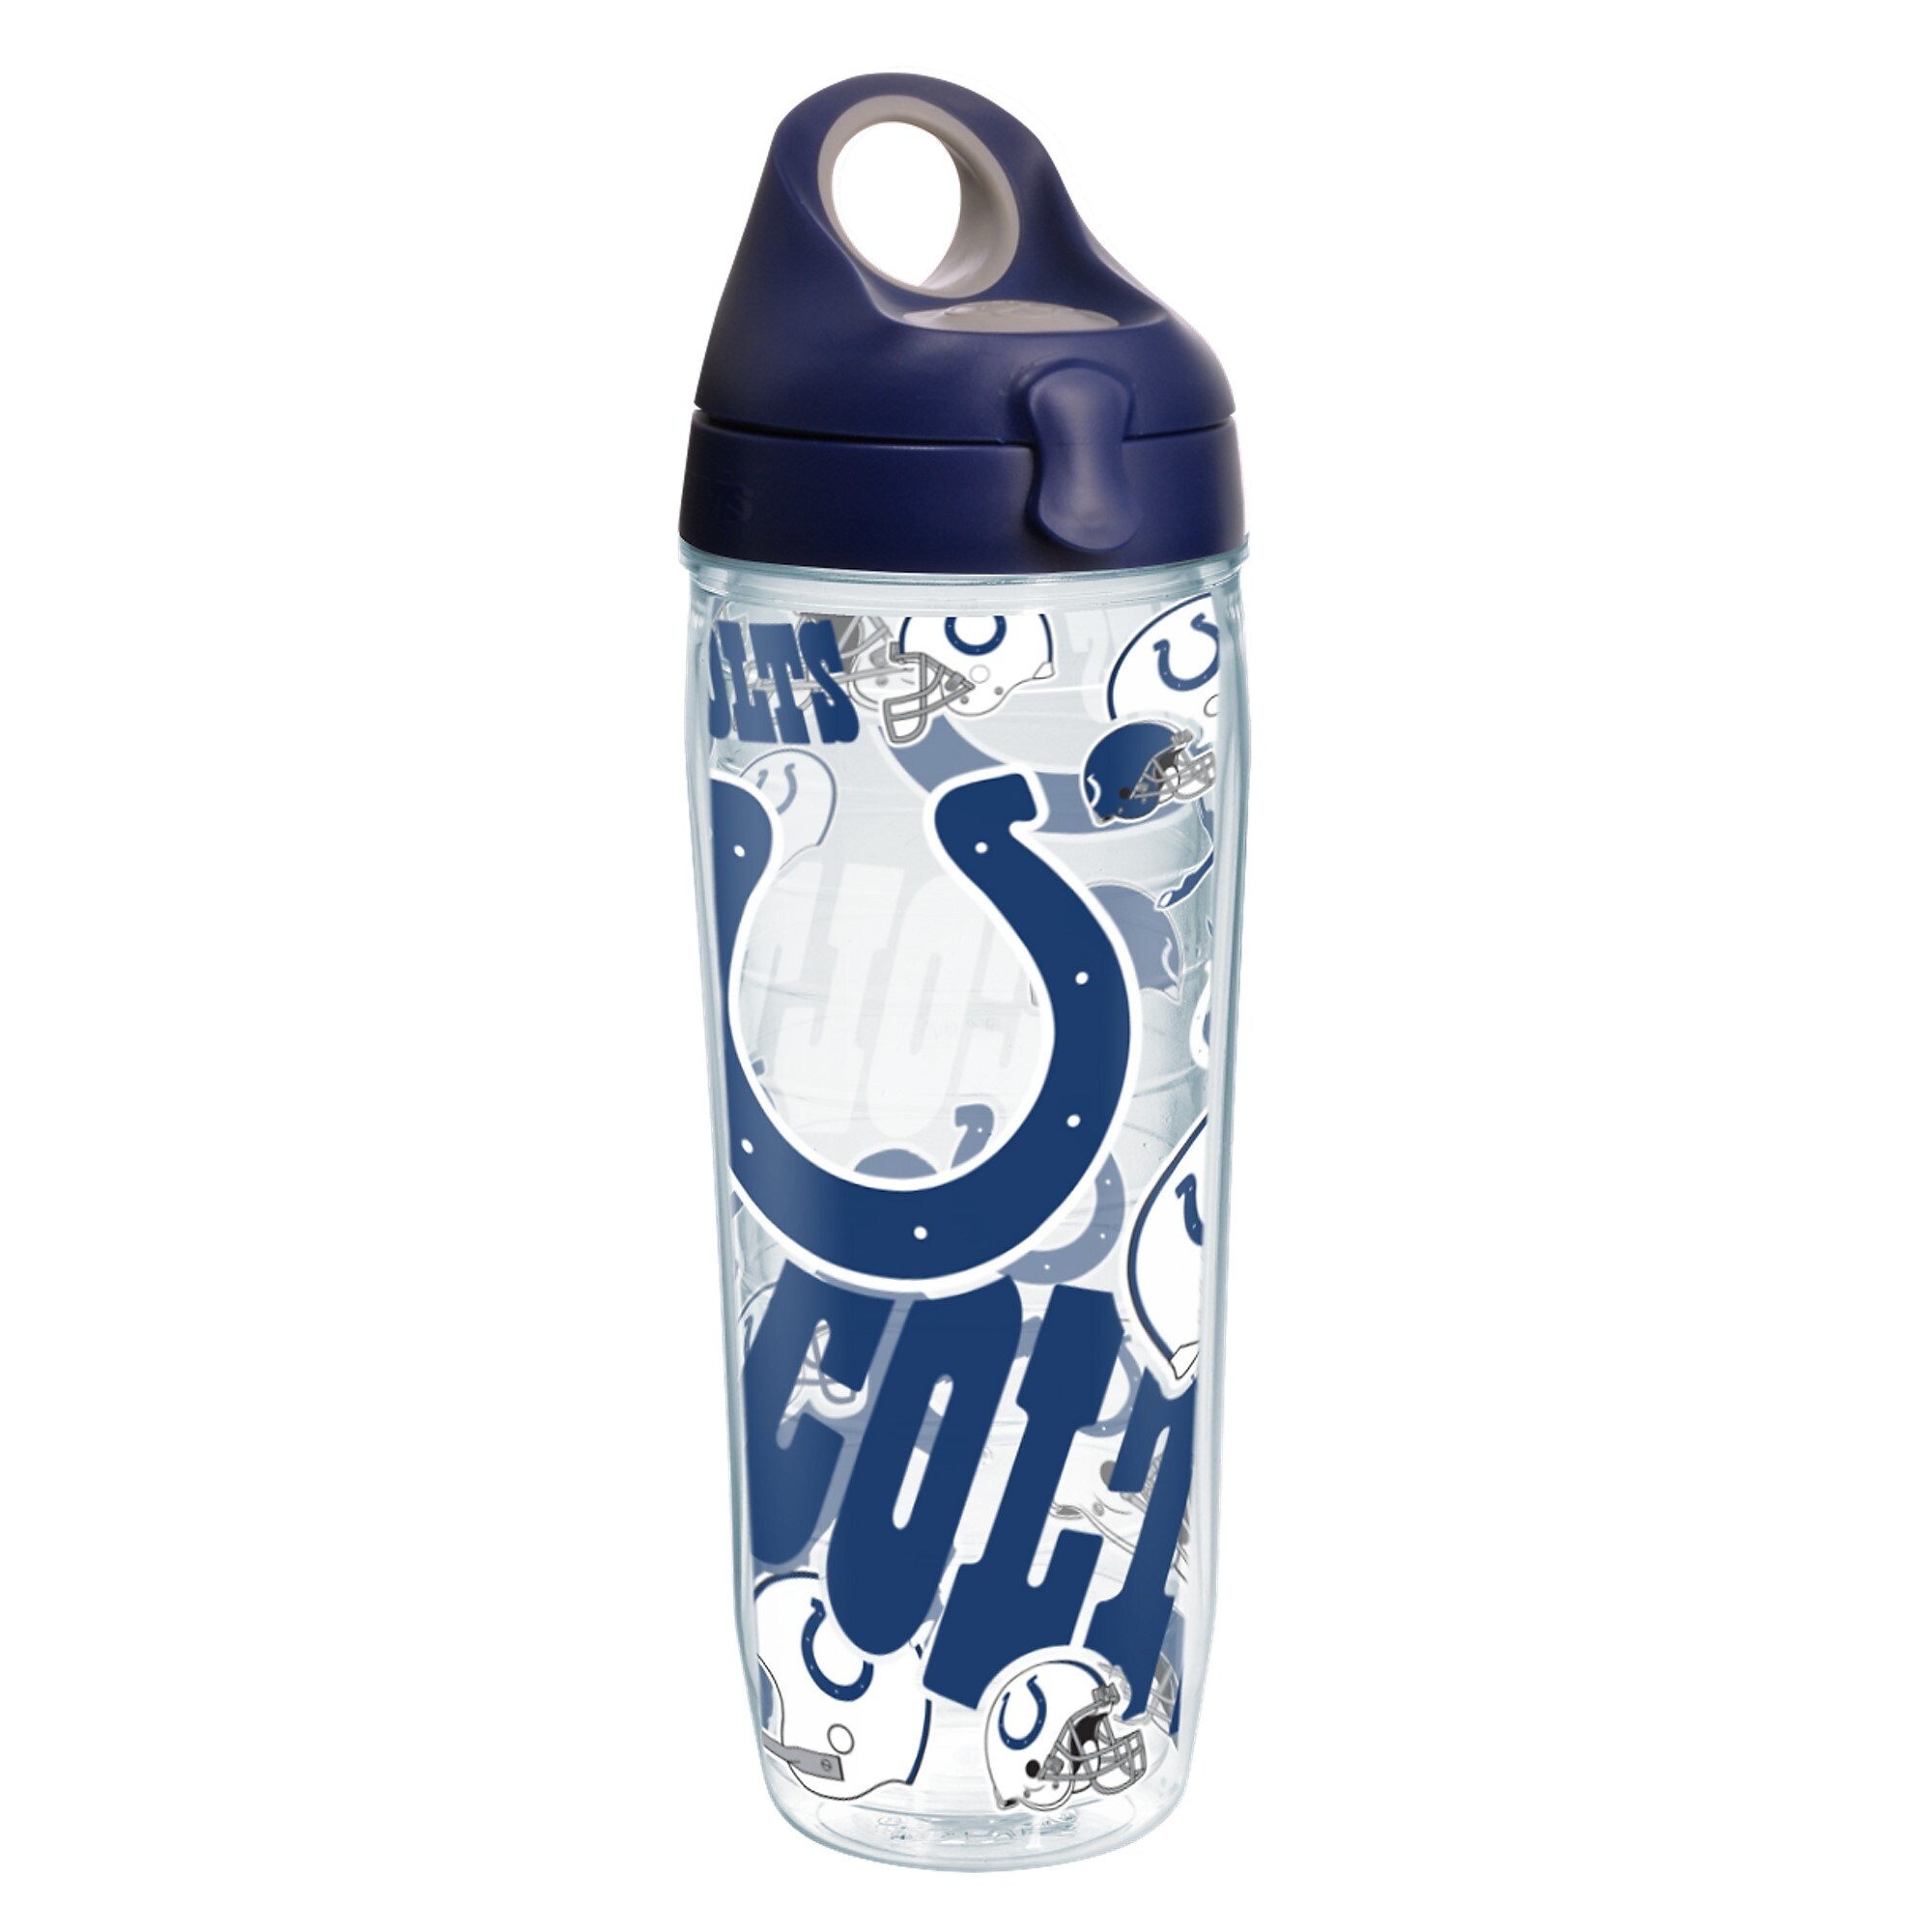 https://ak1.ostkcdn.com/images/products/is/images/direct/4a43c21ba48d62b8c9a4d10f075faf2a7e3490b1/NFL-Indianapolis-Colts-All-Over-24-oz-Water-Bottle-with-lid.jpg